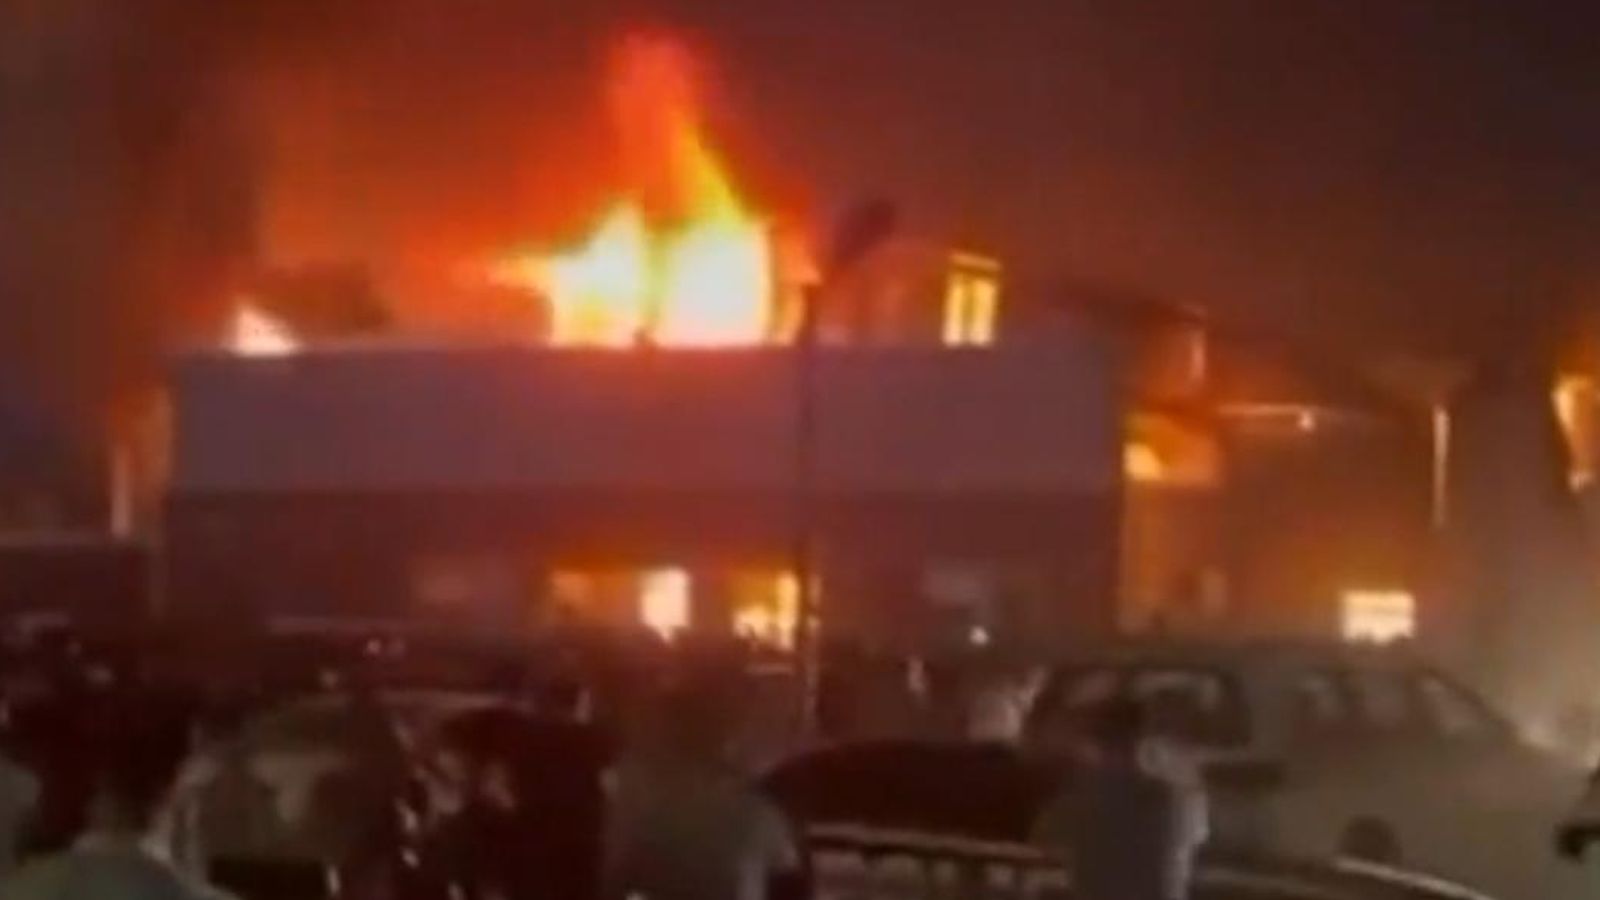 More than 100 people are dead in fire at wedding celebration in Iraq